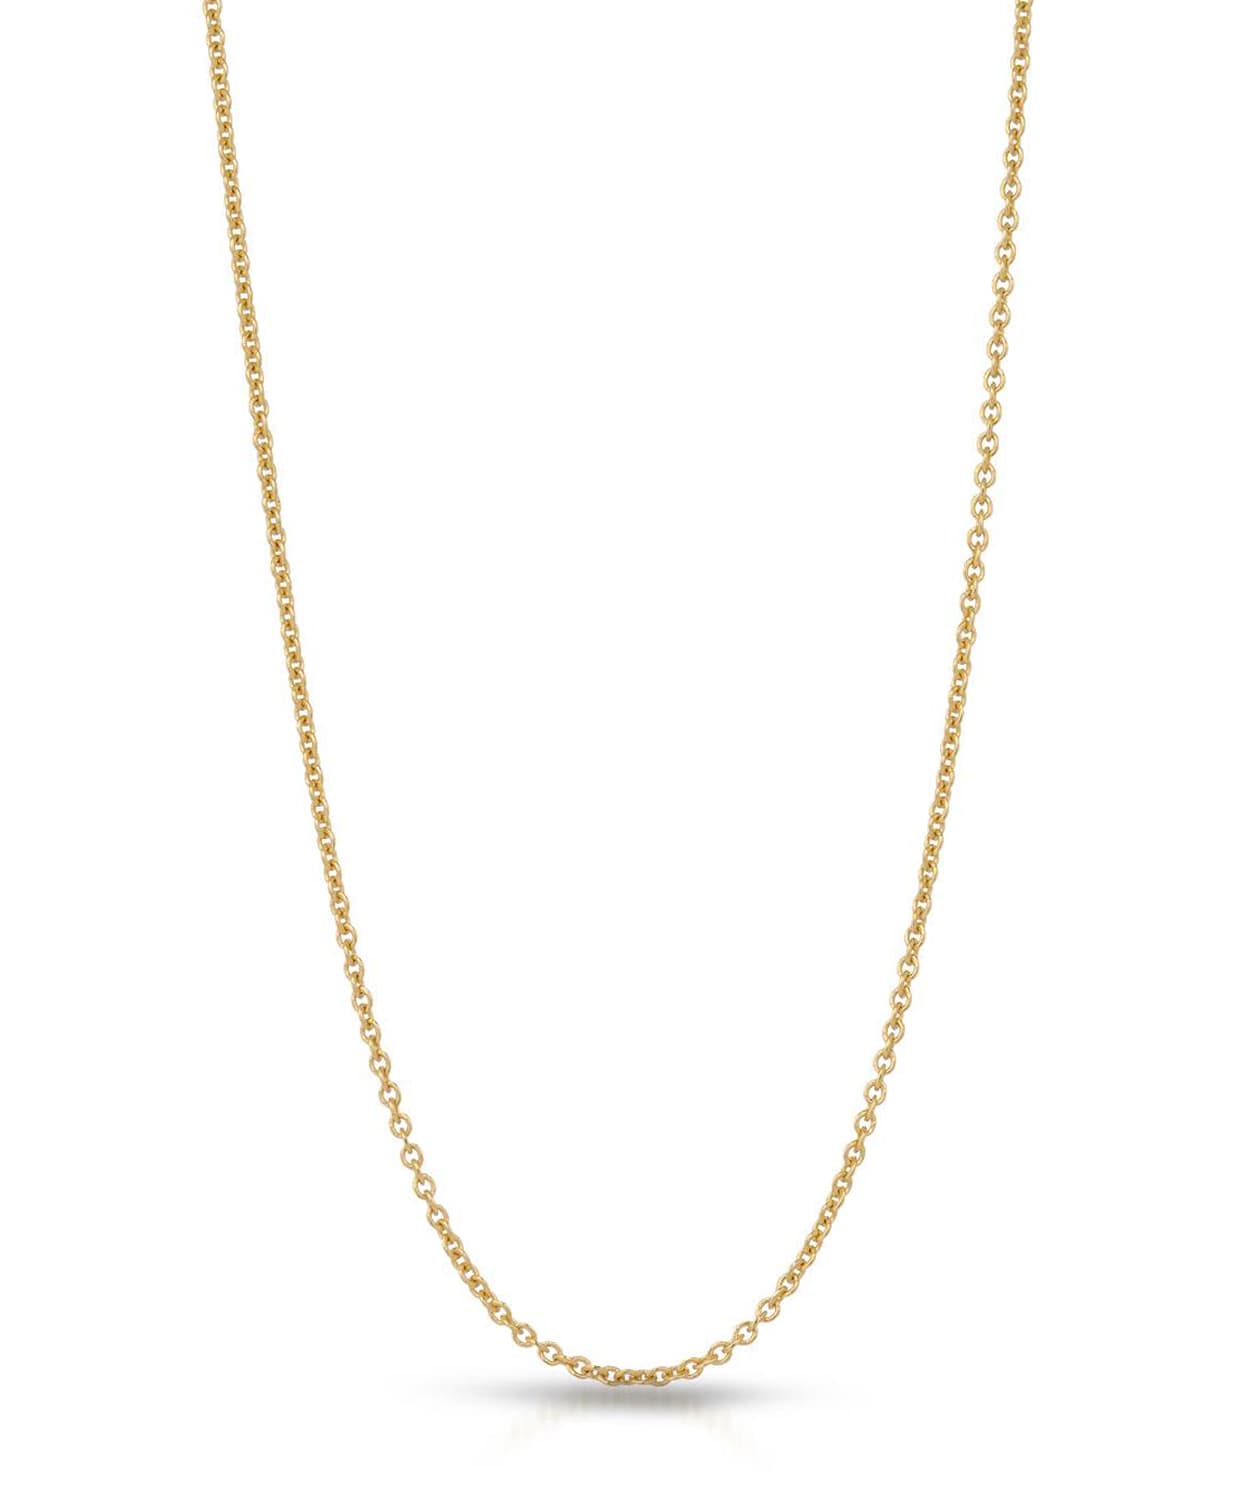 1.2mm 14k Yellow Gold Rolo Adjustable Chain View 1